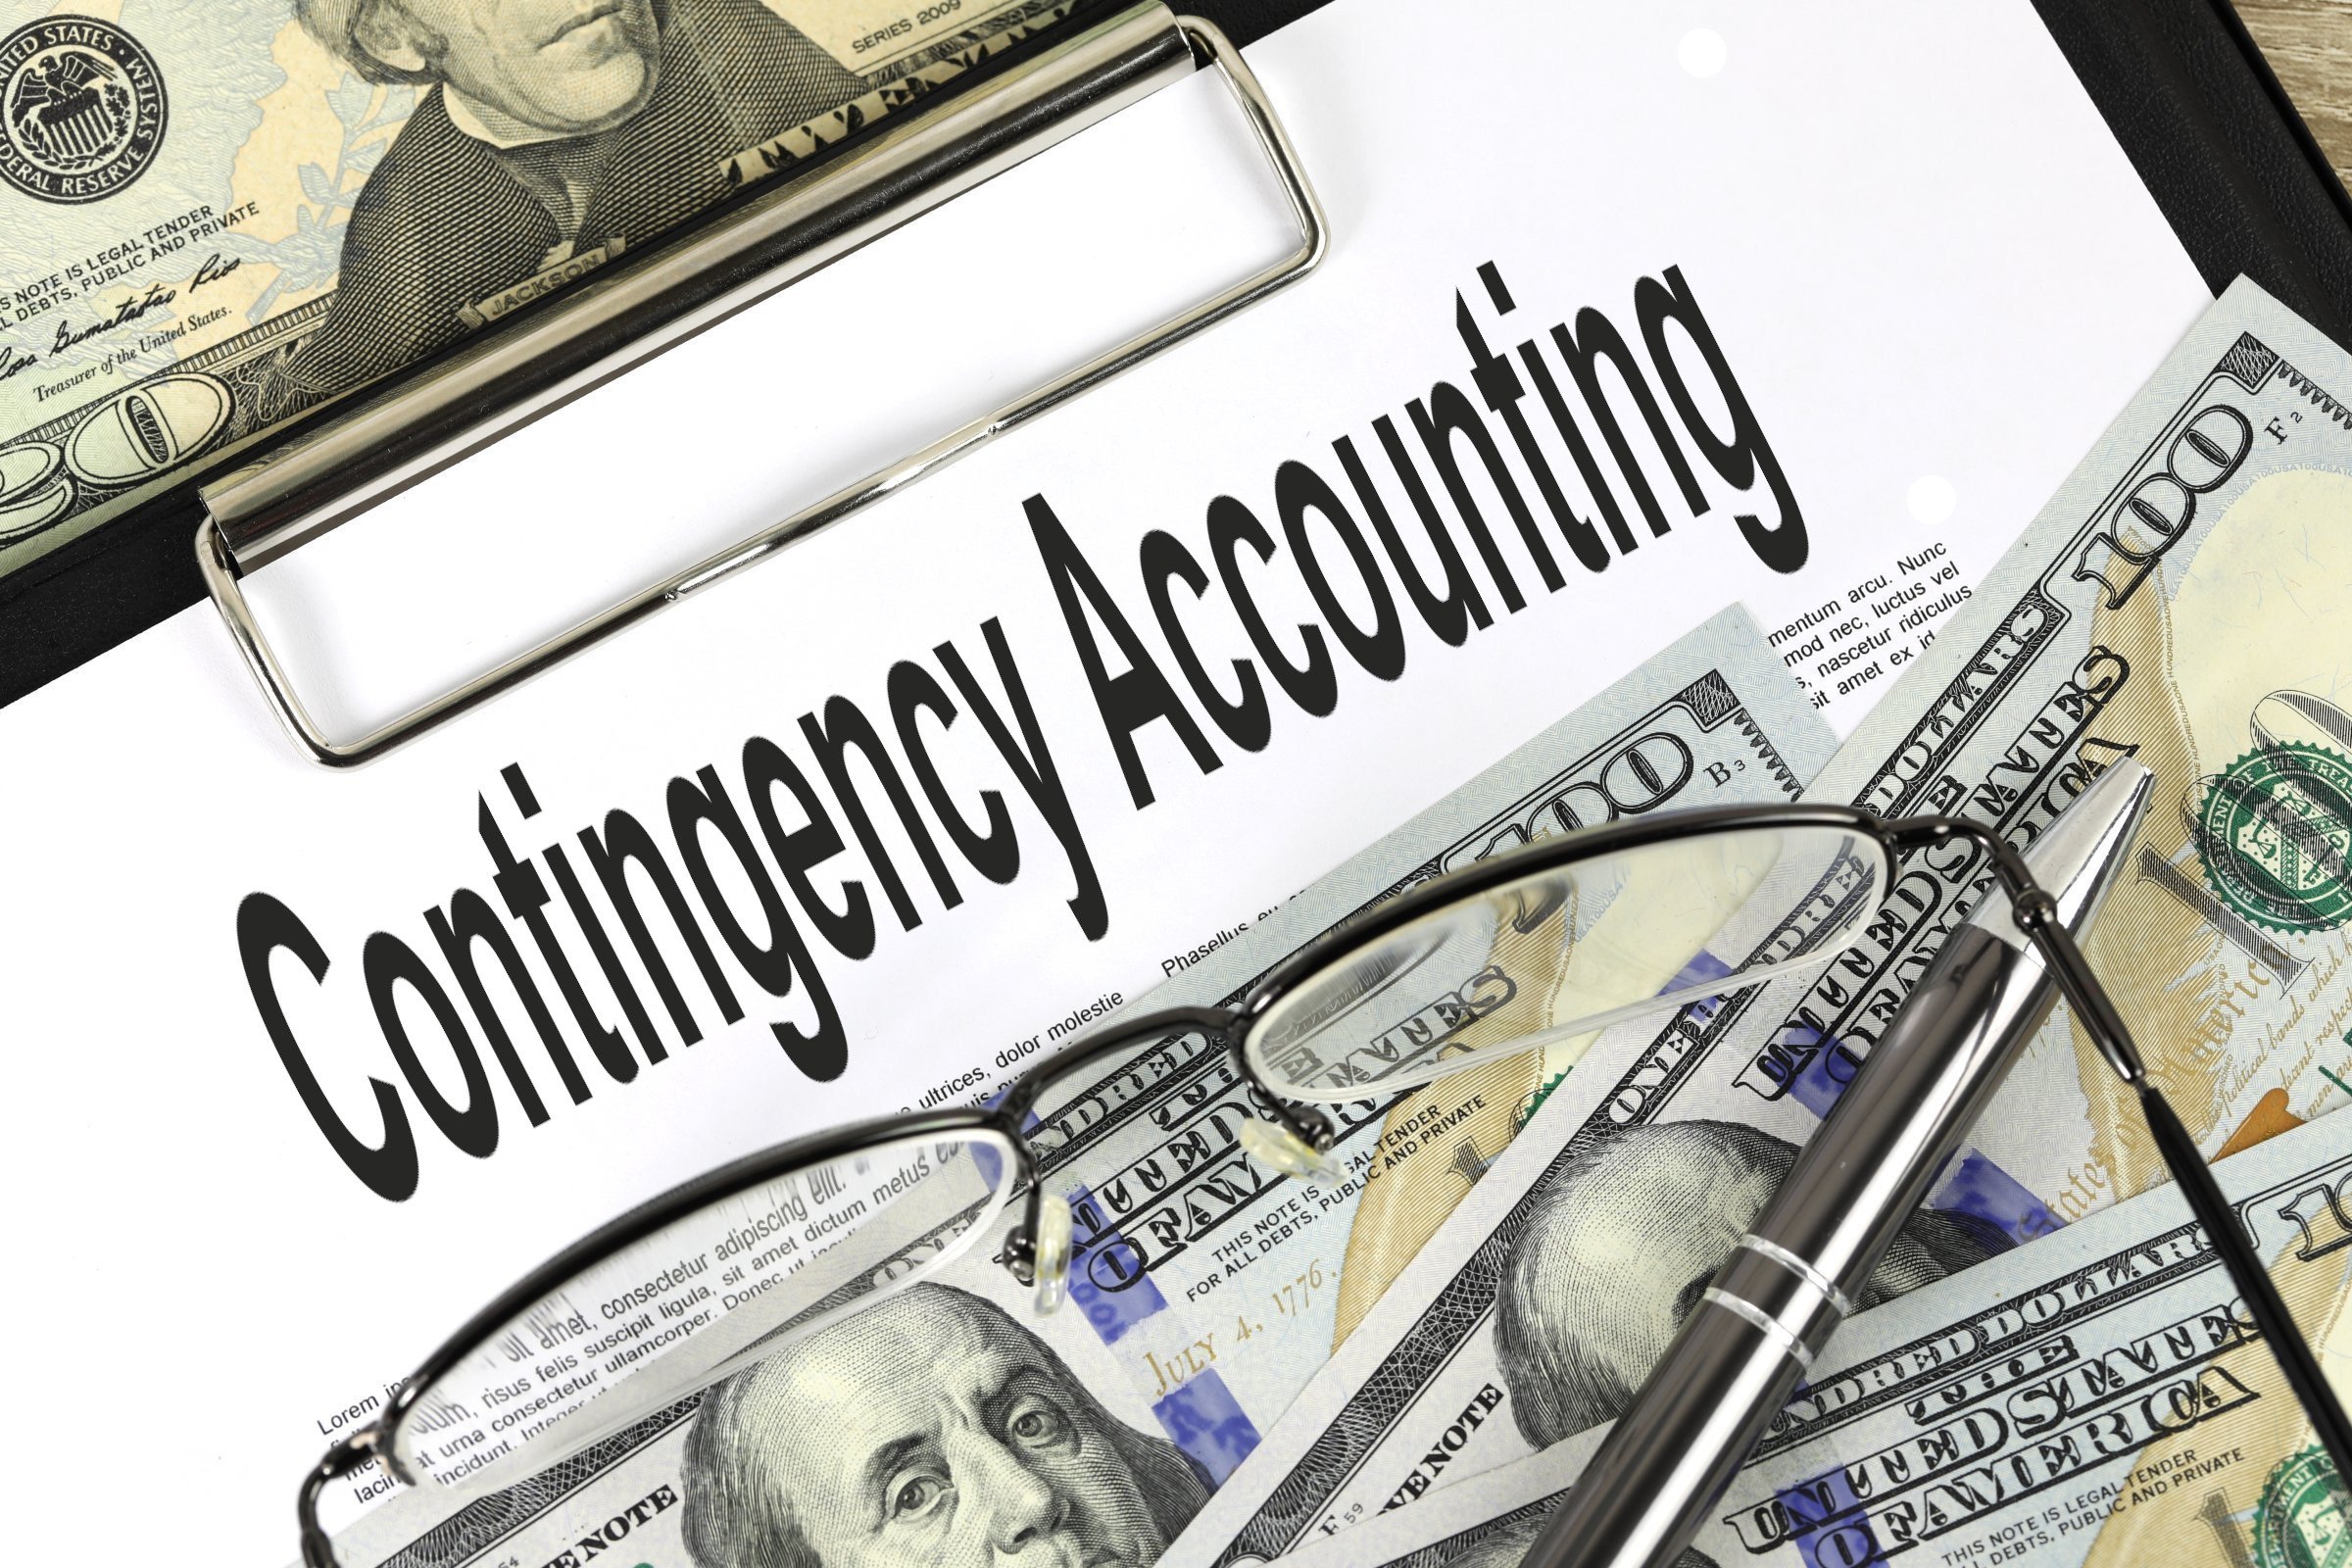 contingency accounting